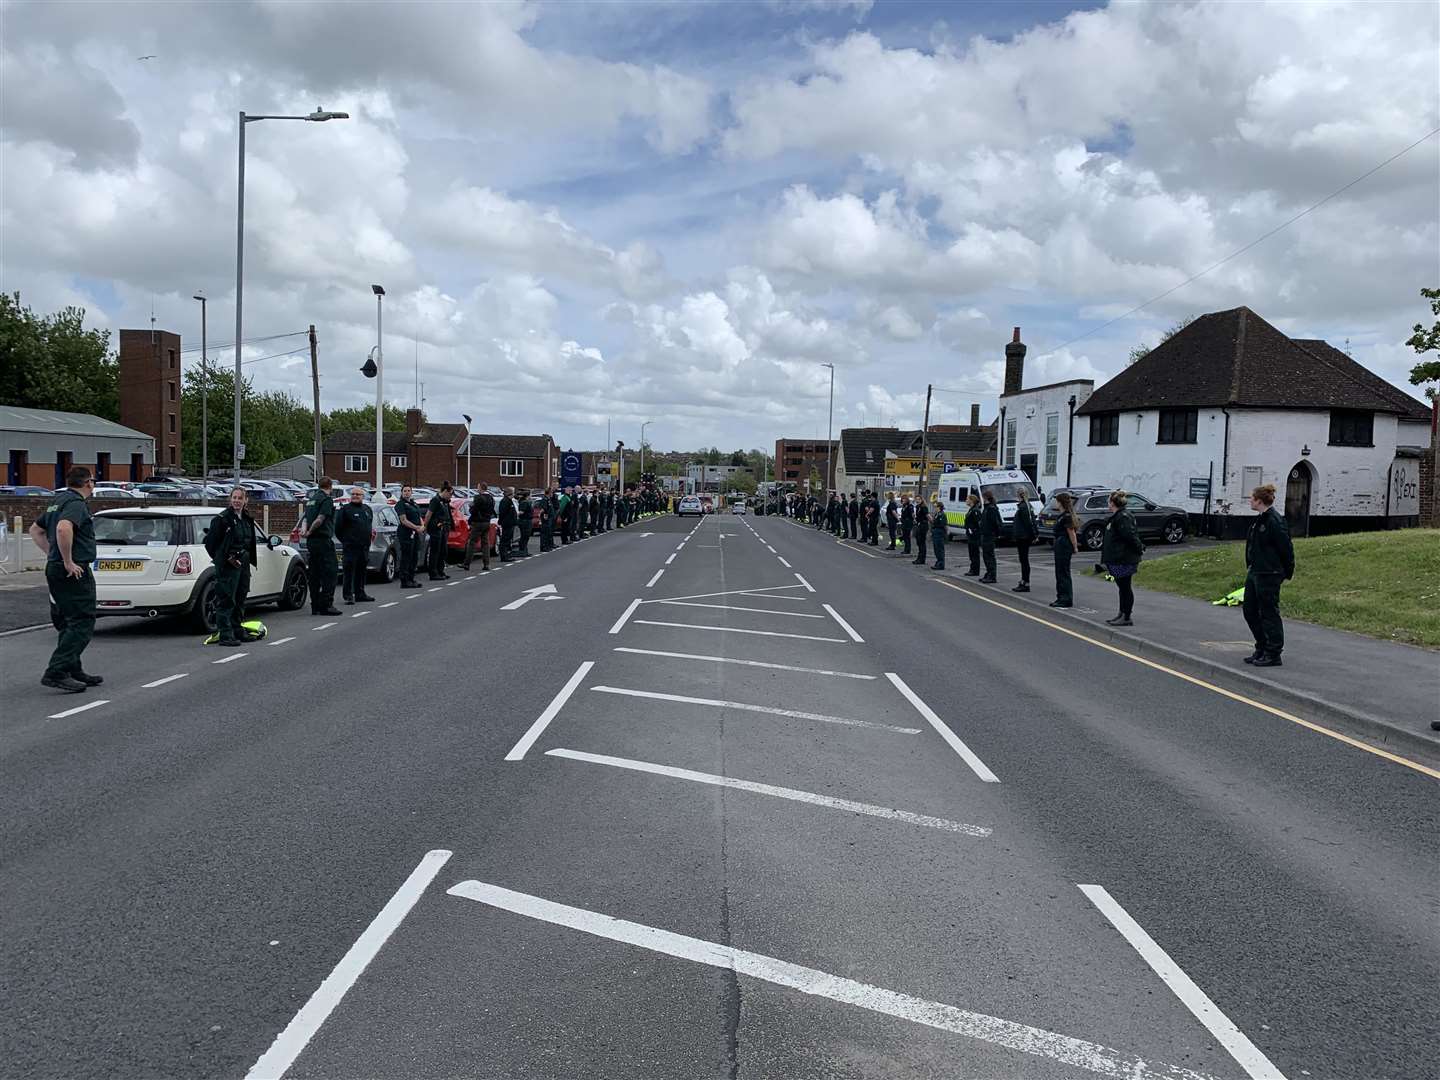 Paramedics formed a guard of honour for the funeral procession of Rhod Prosser in Sittingbourne